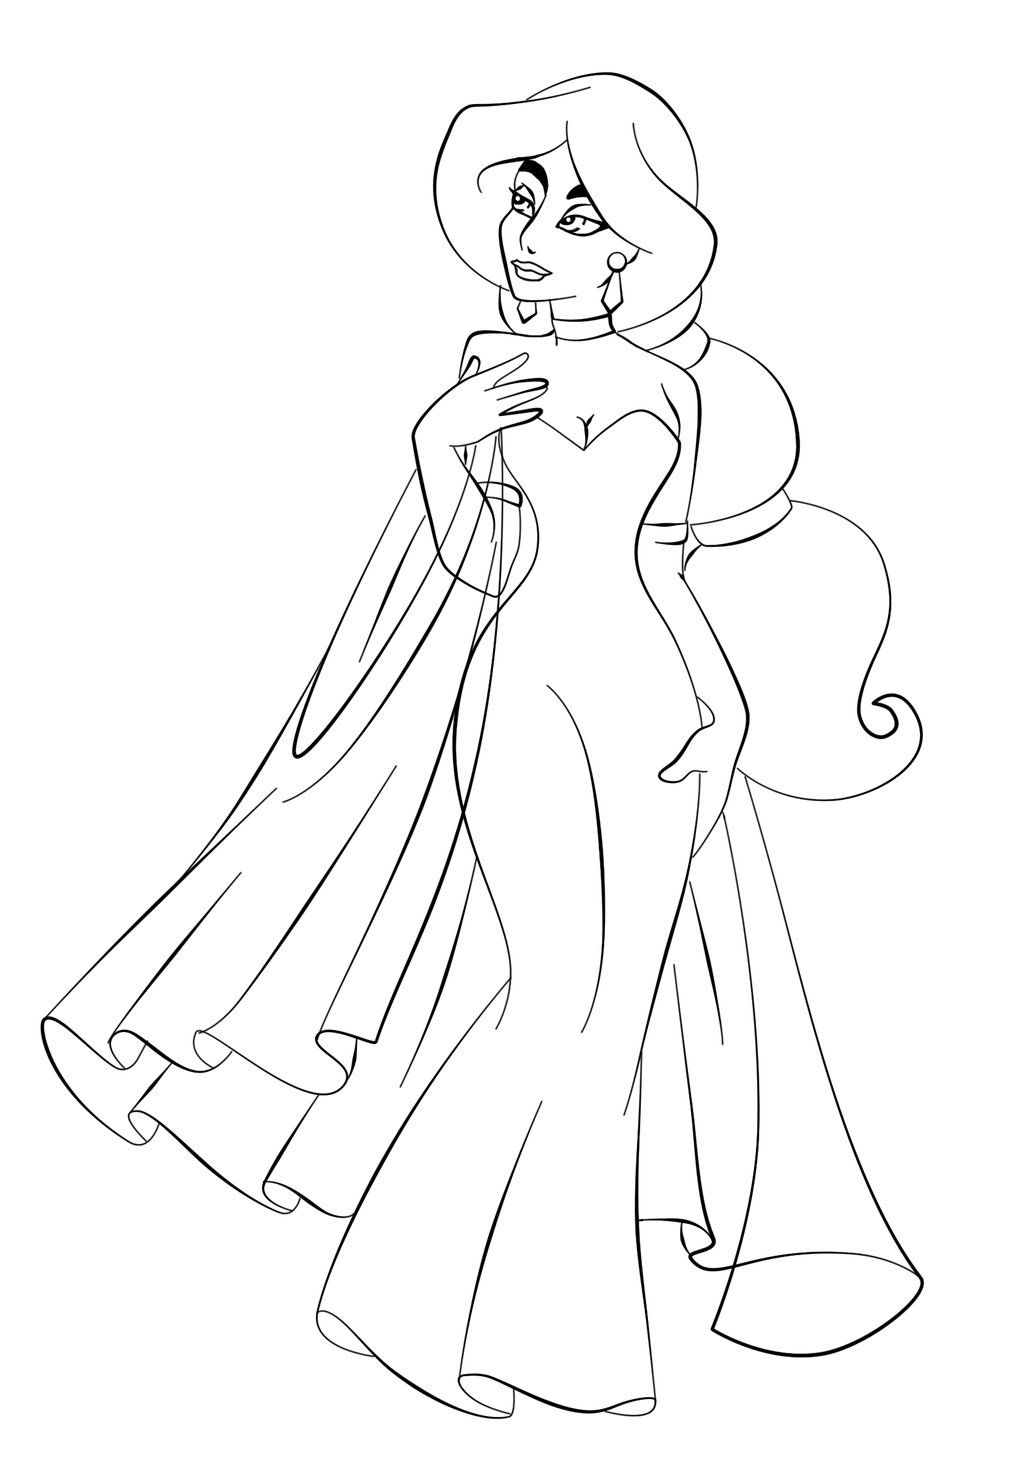 Full Page Princess Coloring Pages - Coloring Home